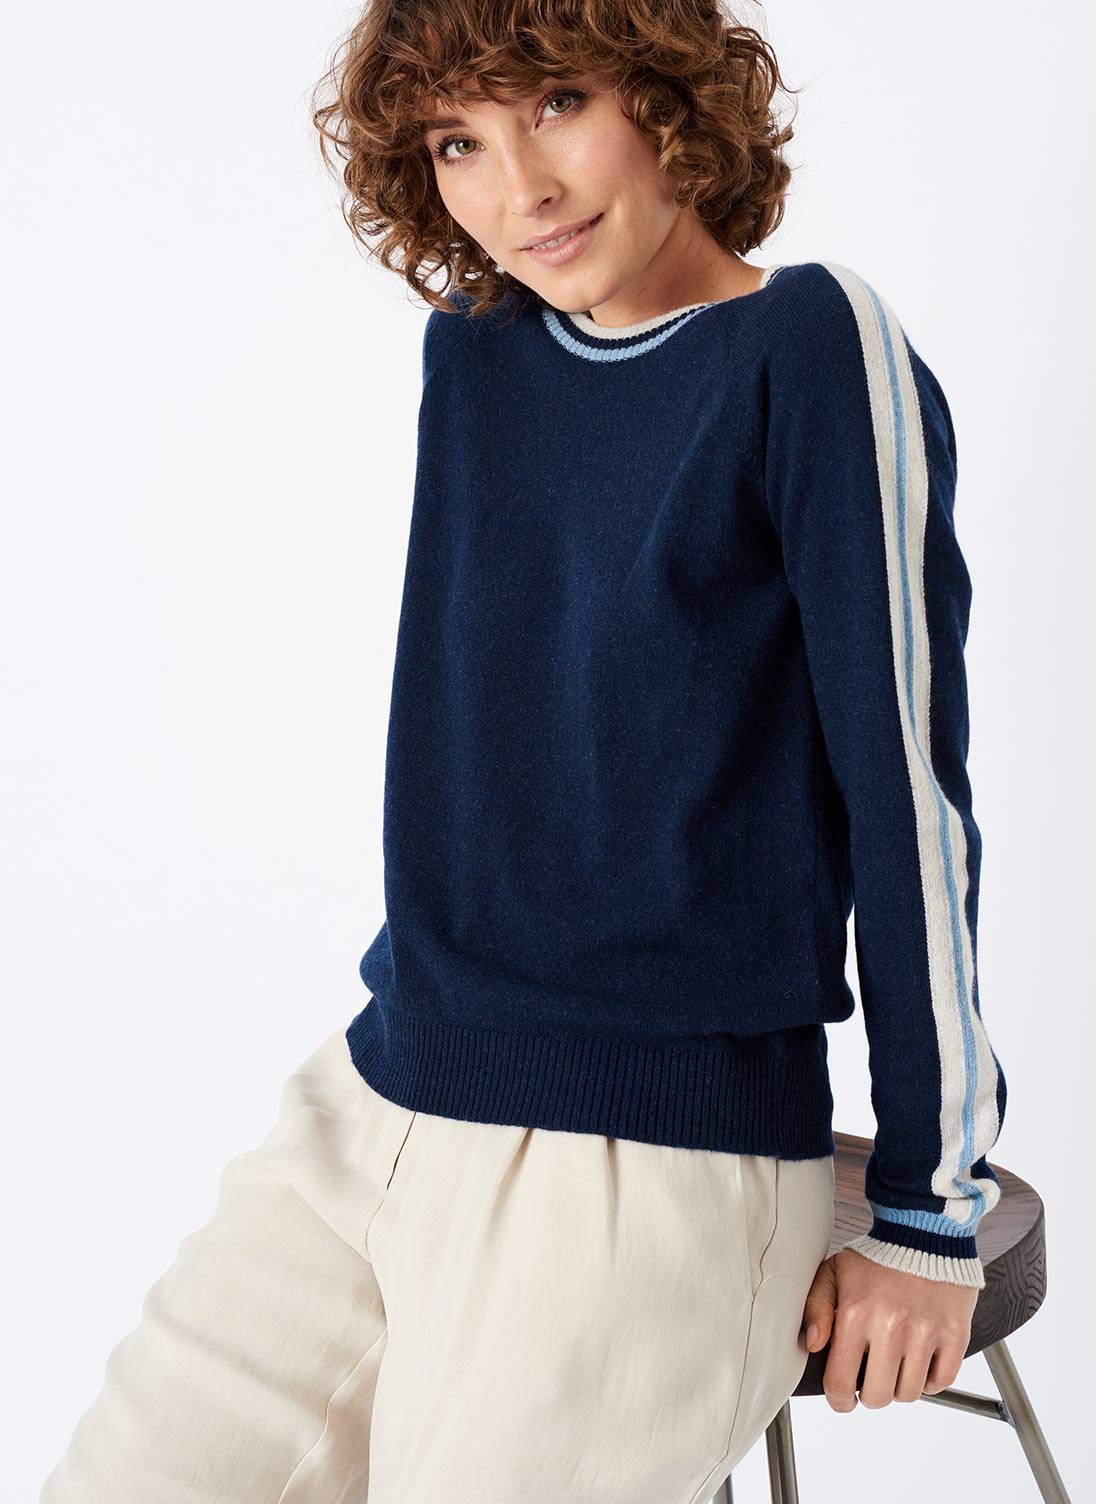 Cashmere Intarsia Stripe Jumper French navy & periwinkle